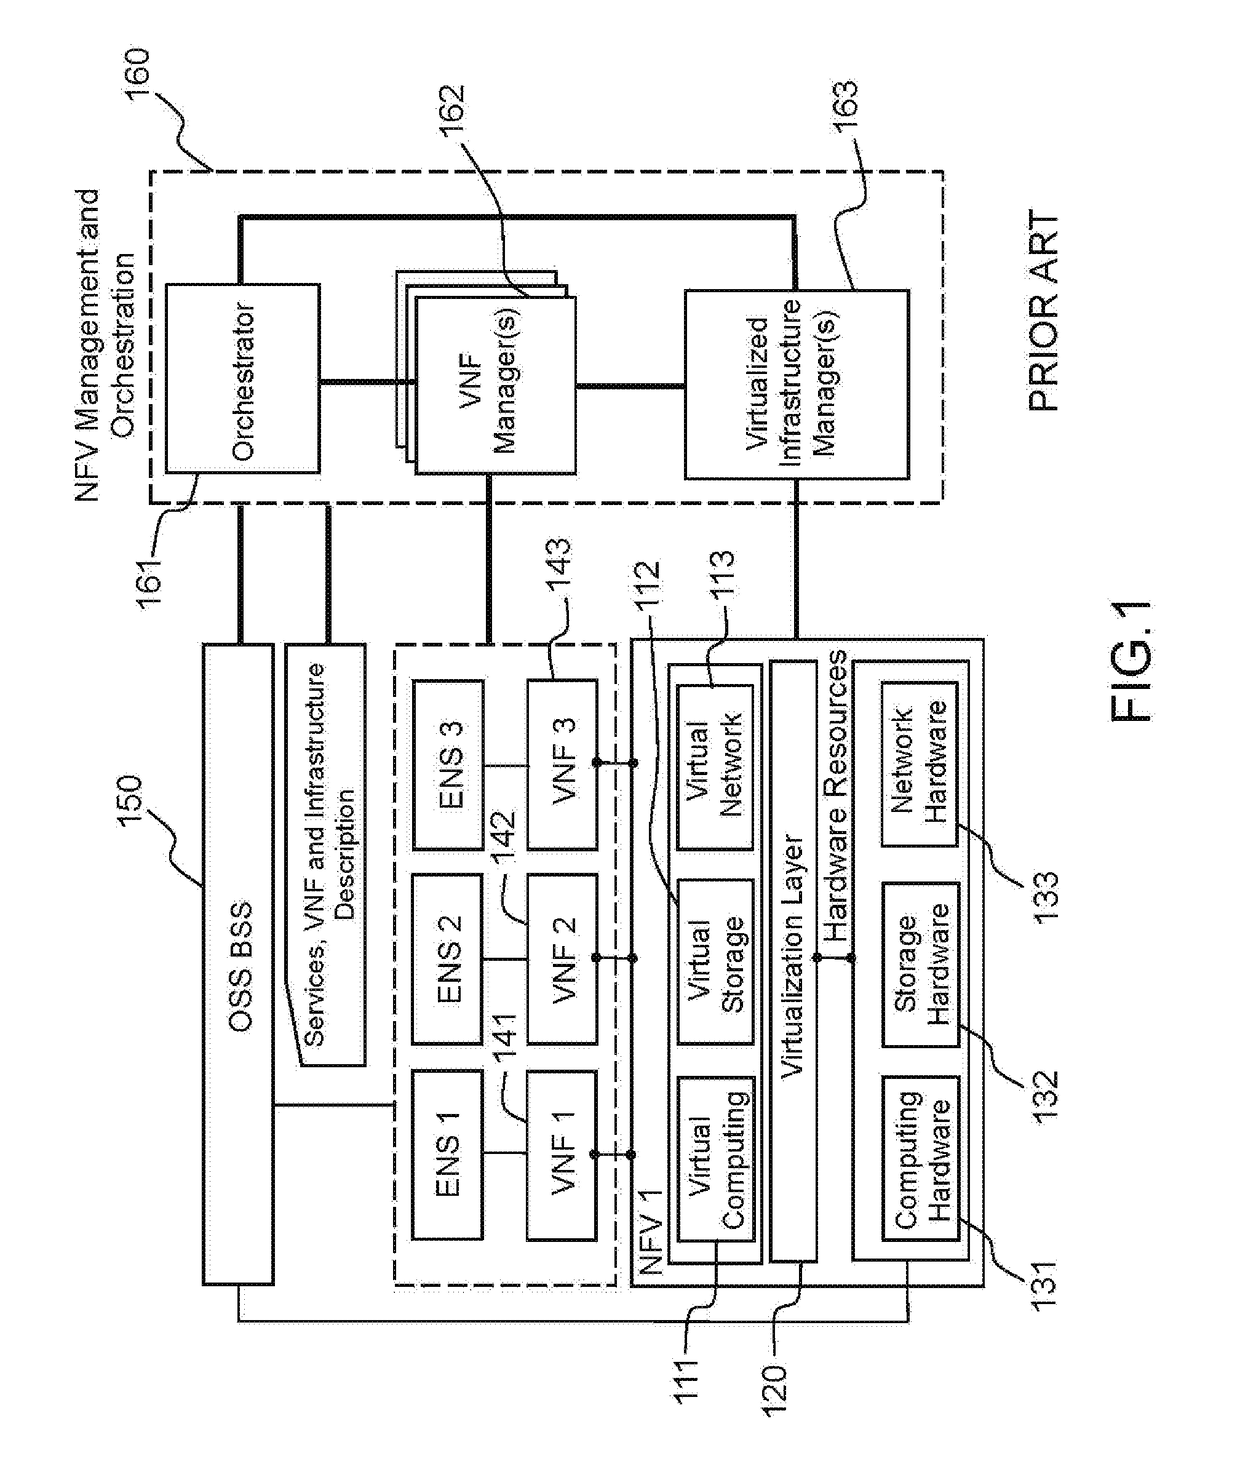 Location based trusted computing nodes in a cloud computing architecture